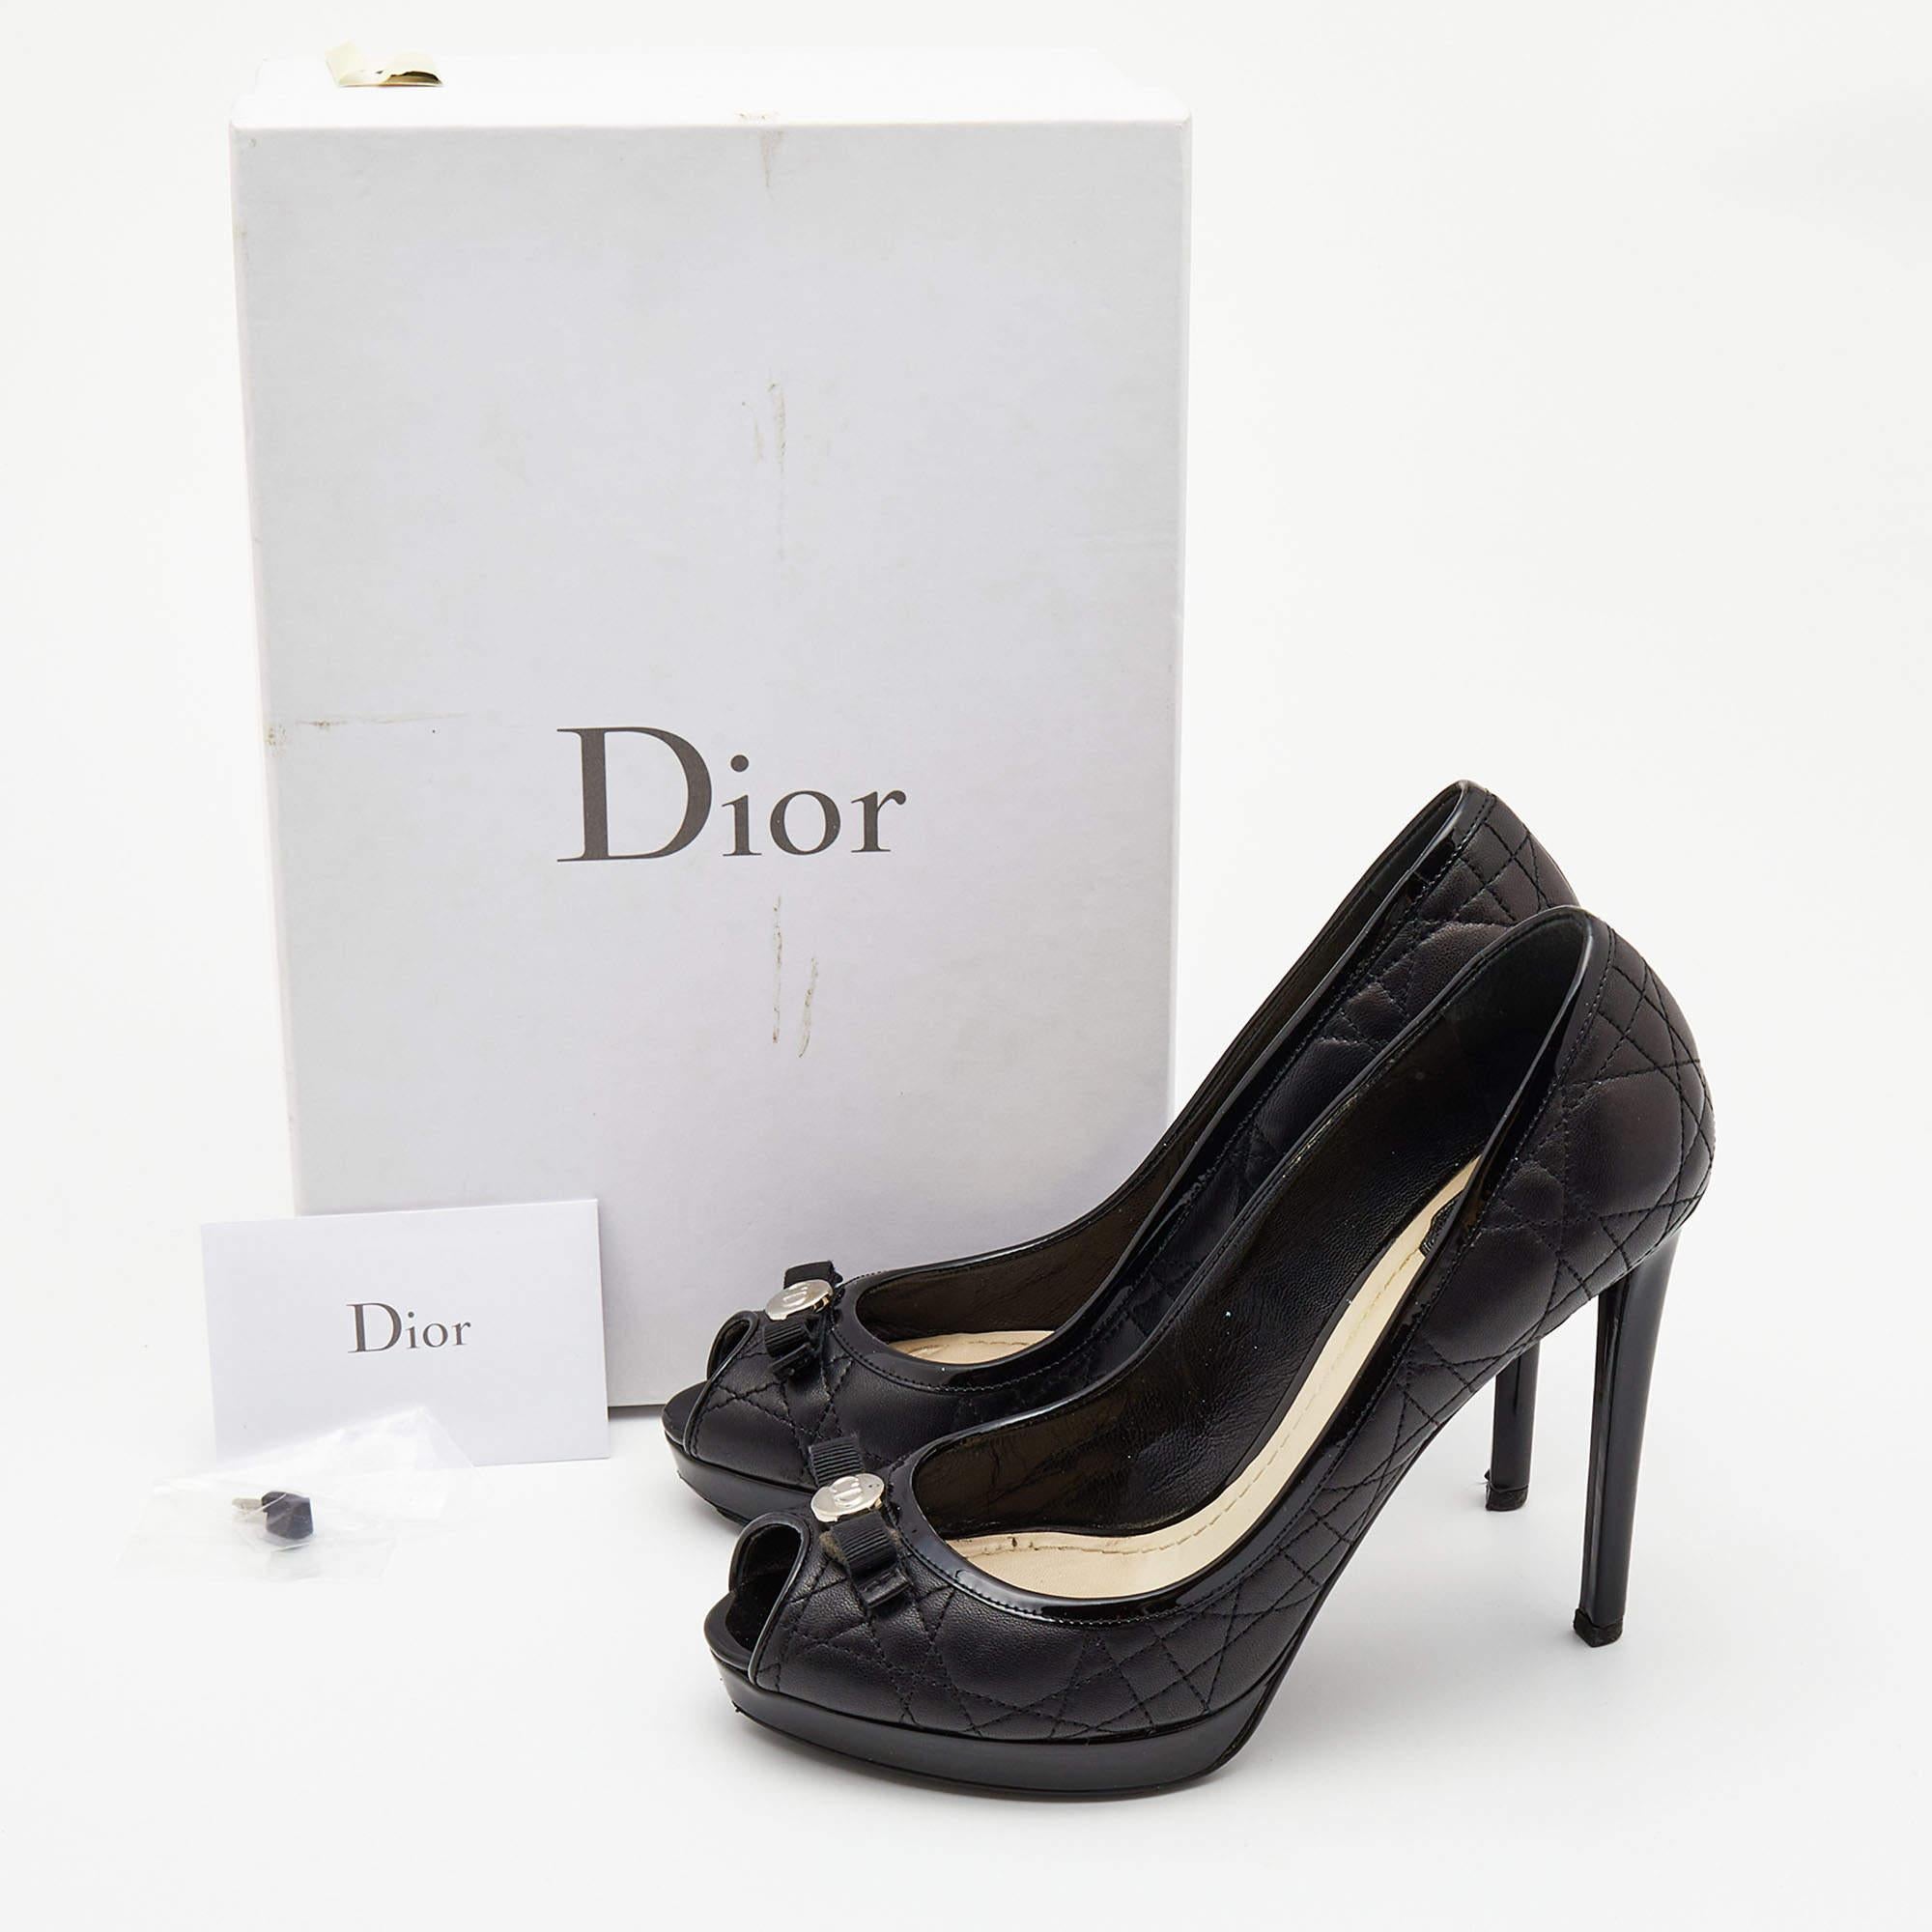 Dior Black Cannage Quilted And Patent Leather Bow Pumps Size 38.5 5